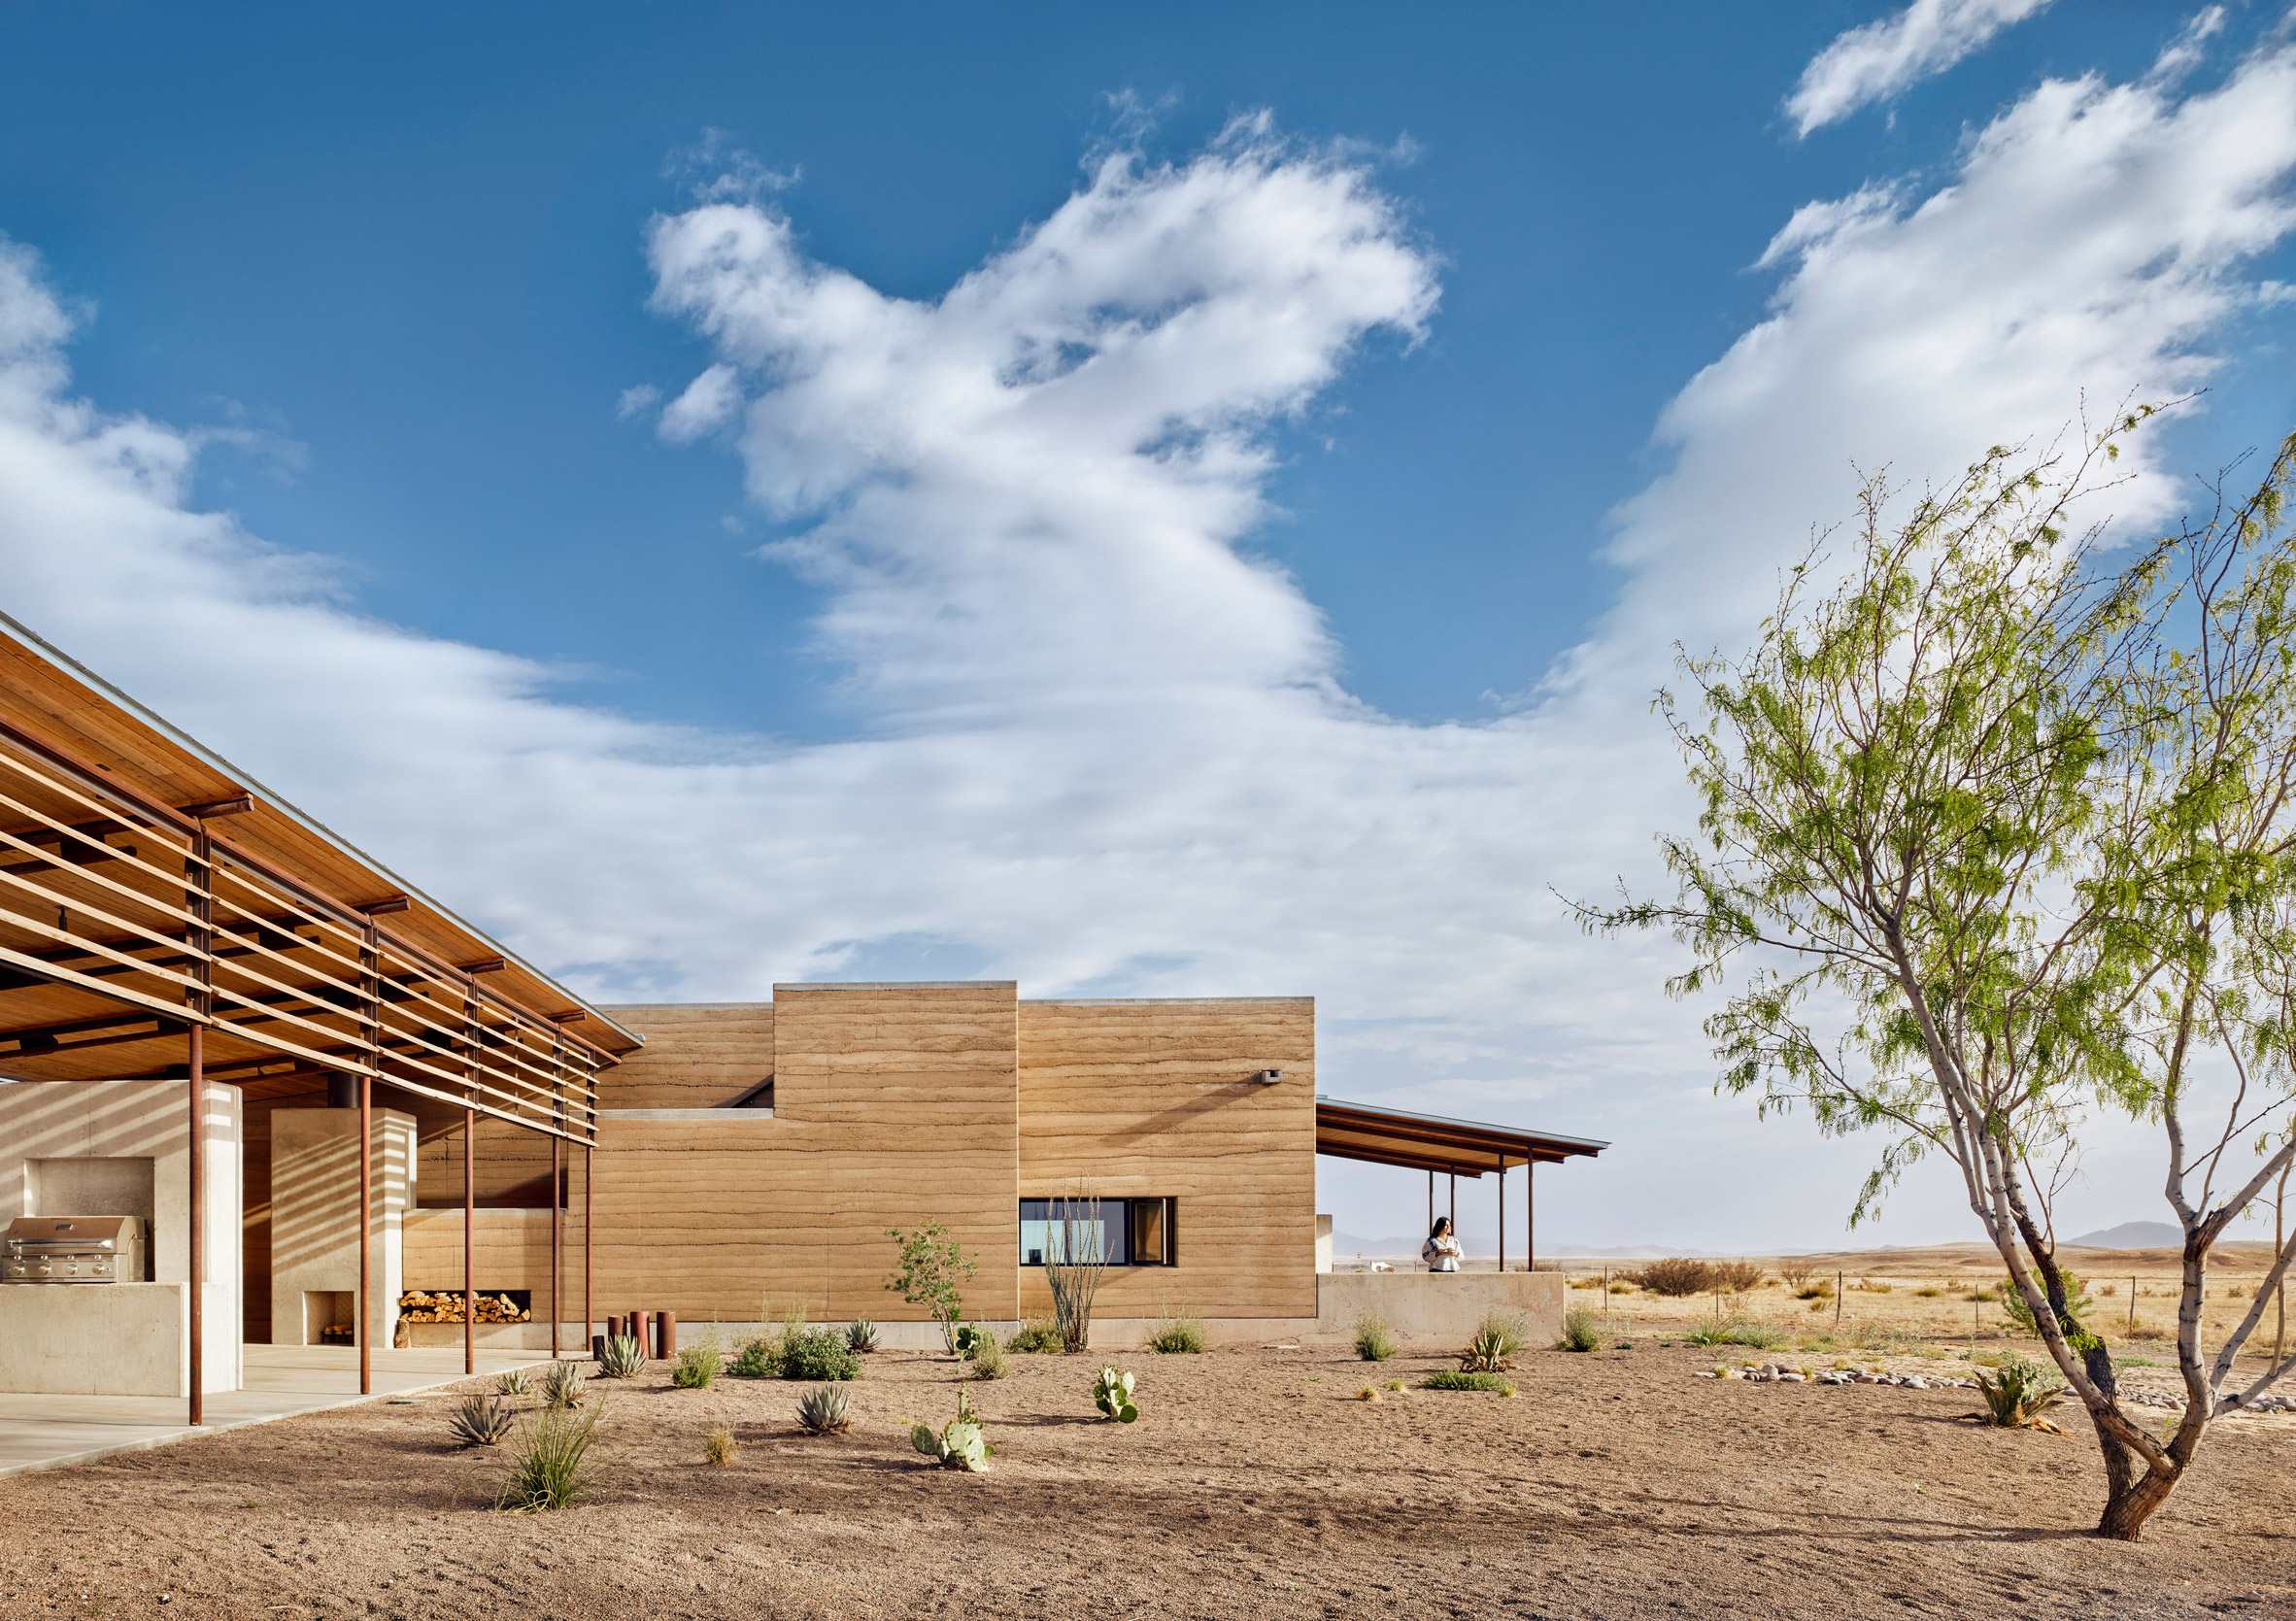 Marfa Ranch house with rammed earth walls in Texas desert by Lake Flato